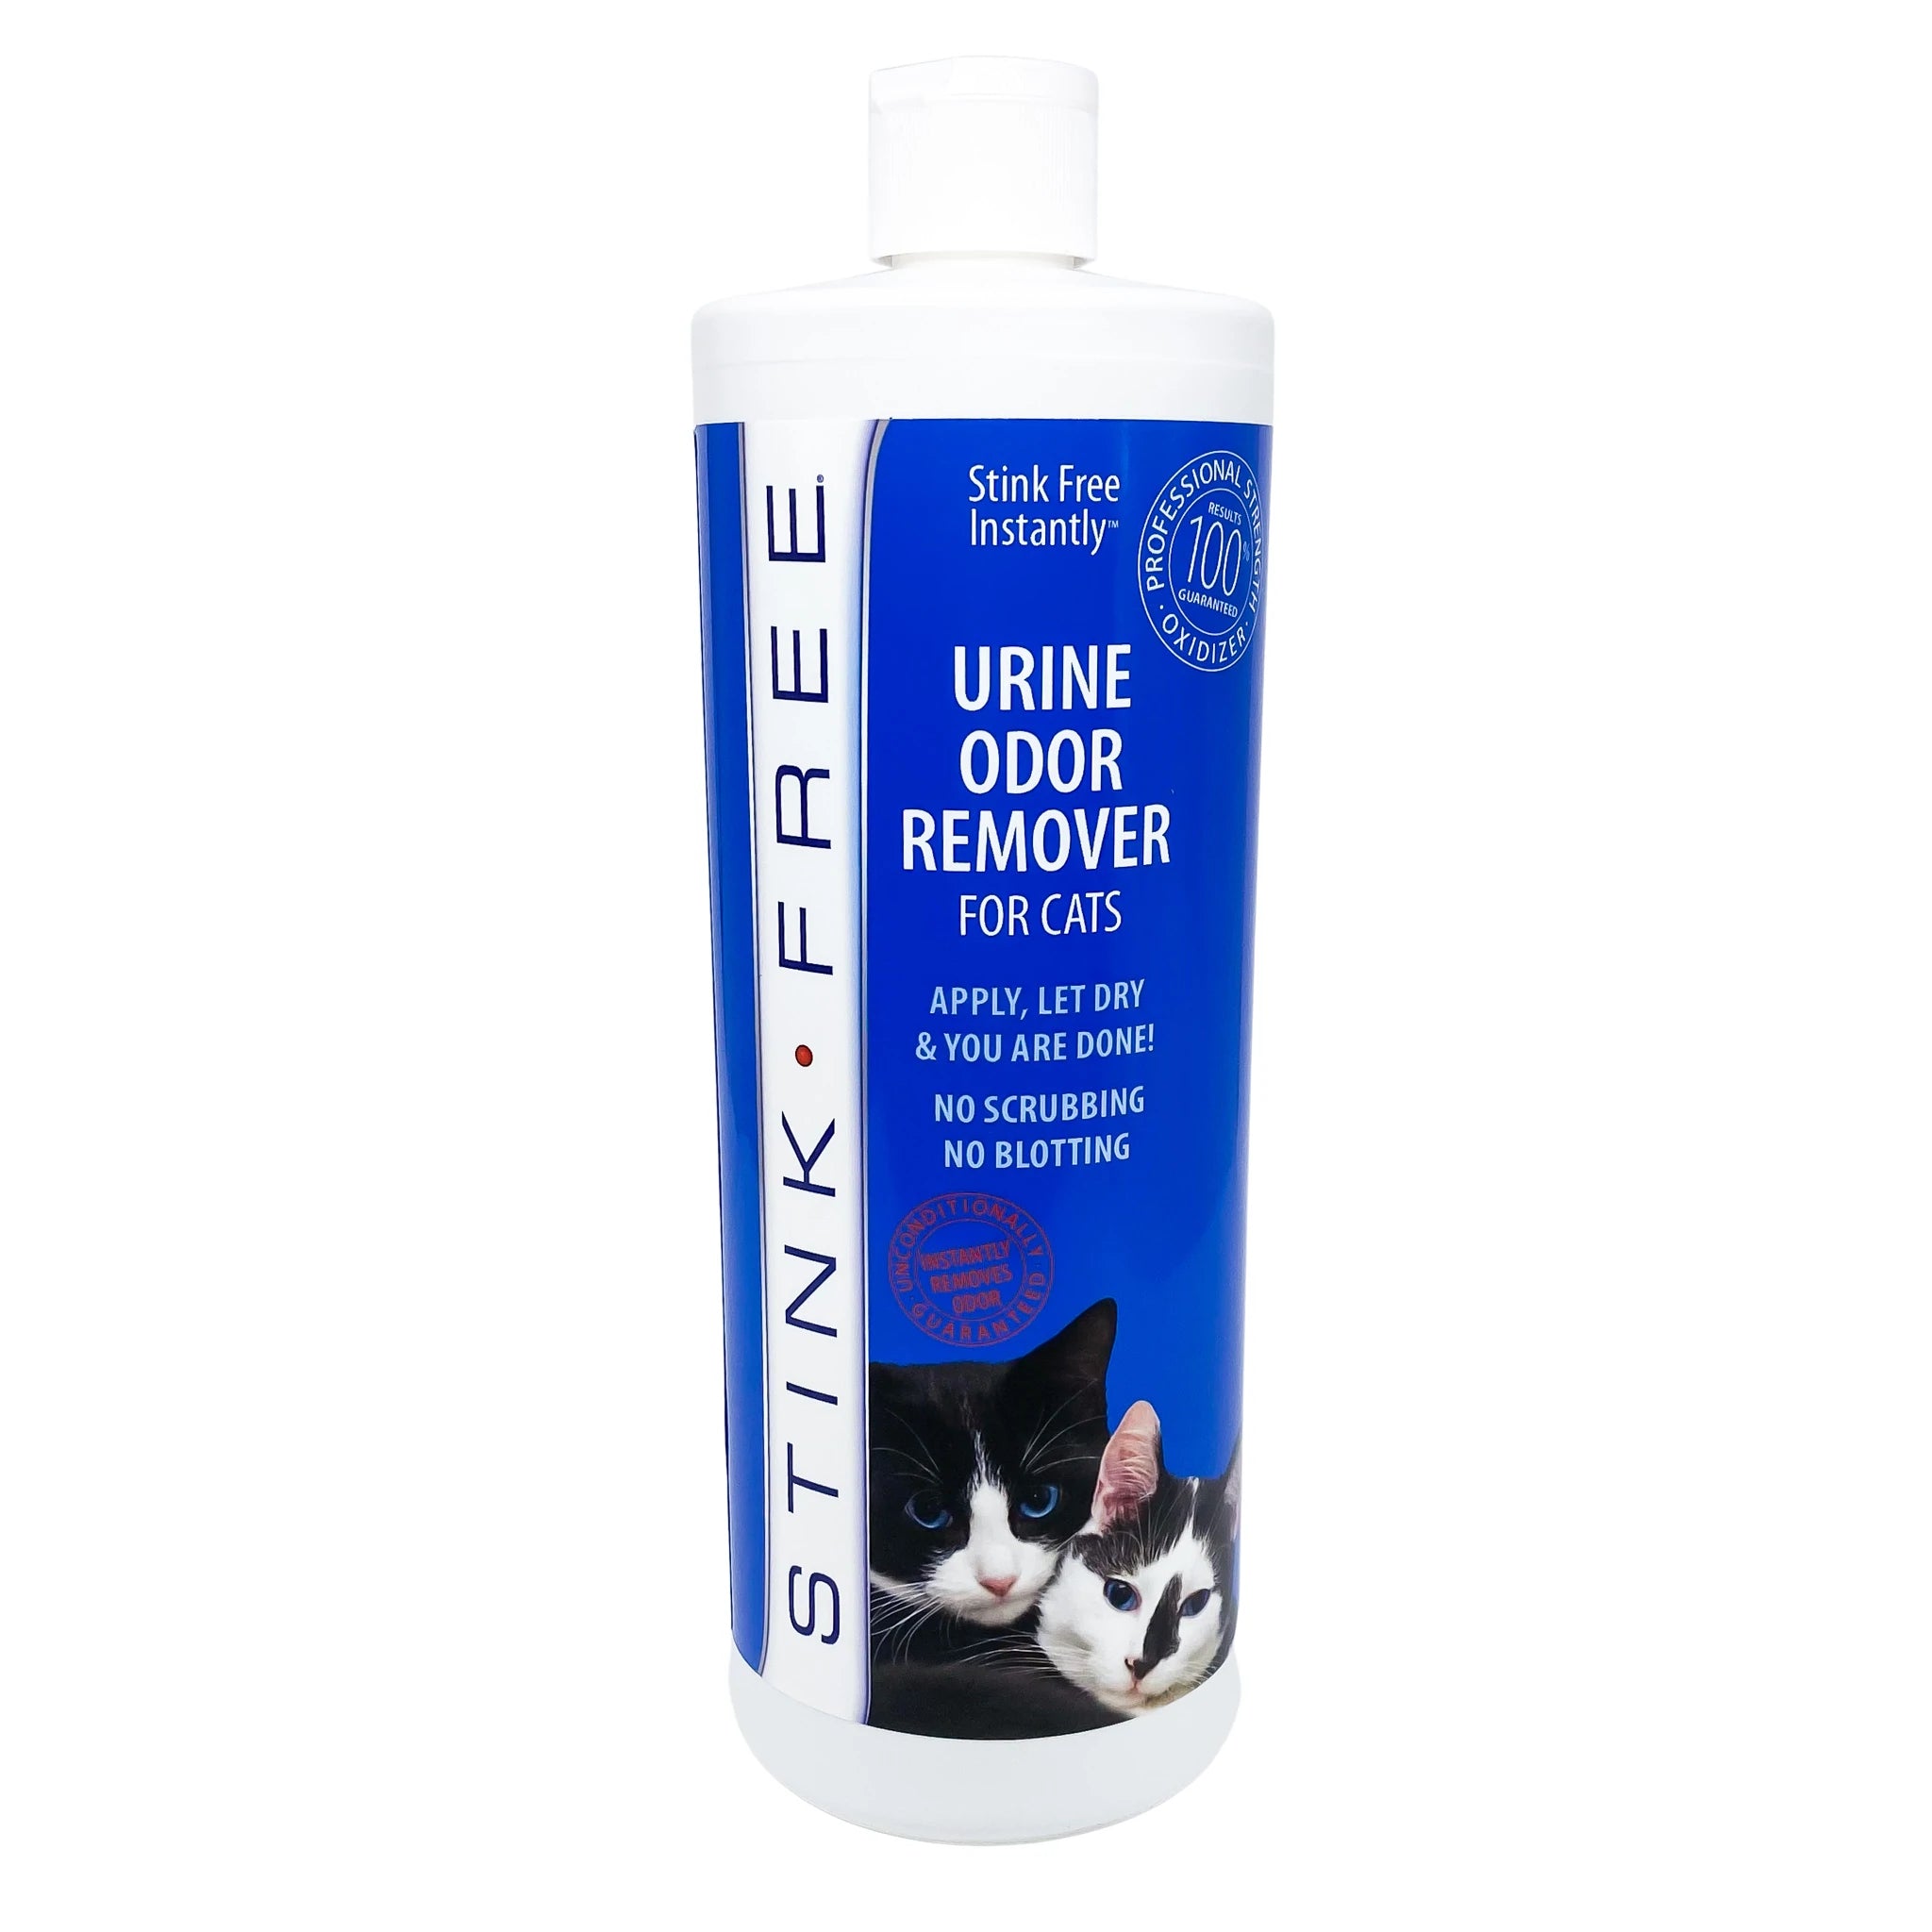 Stink Free Instant Urine Odor Remover For Cats